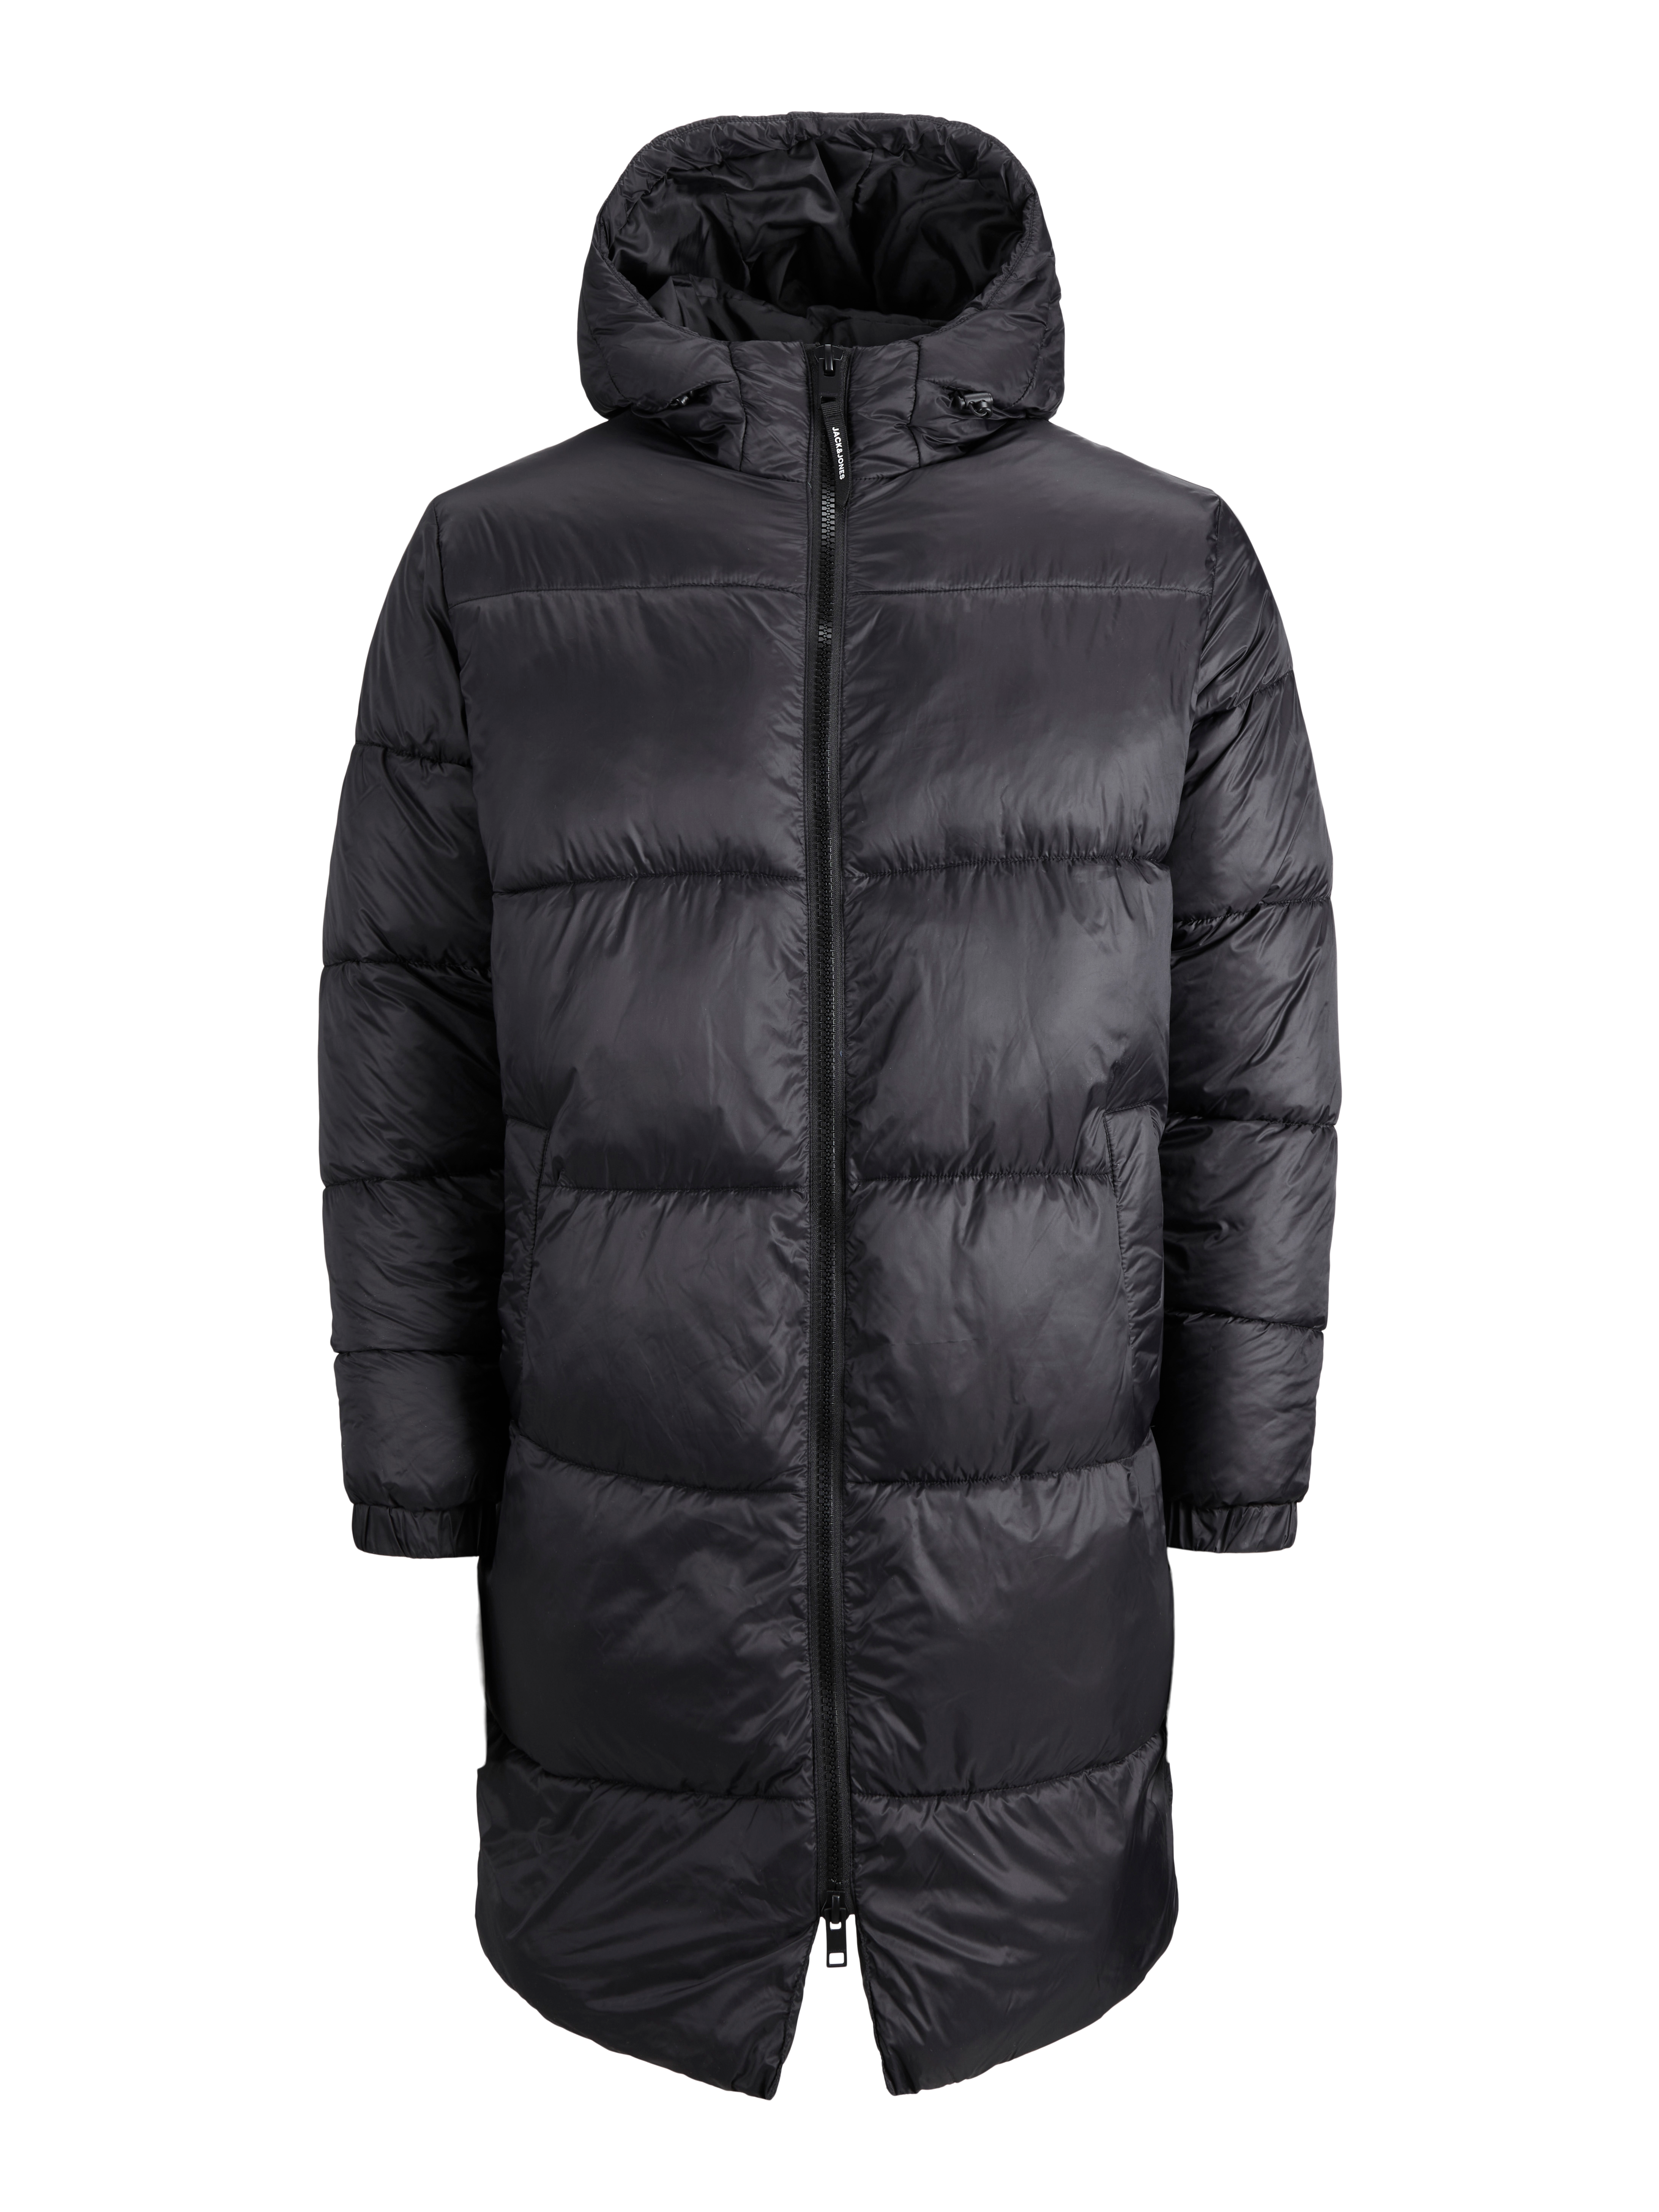 Black Puffer Jacket PNG Pic